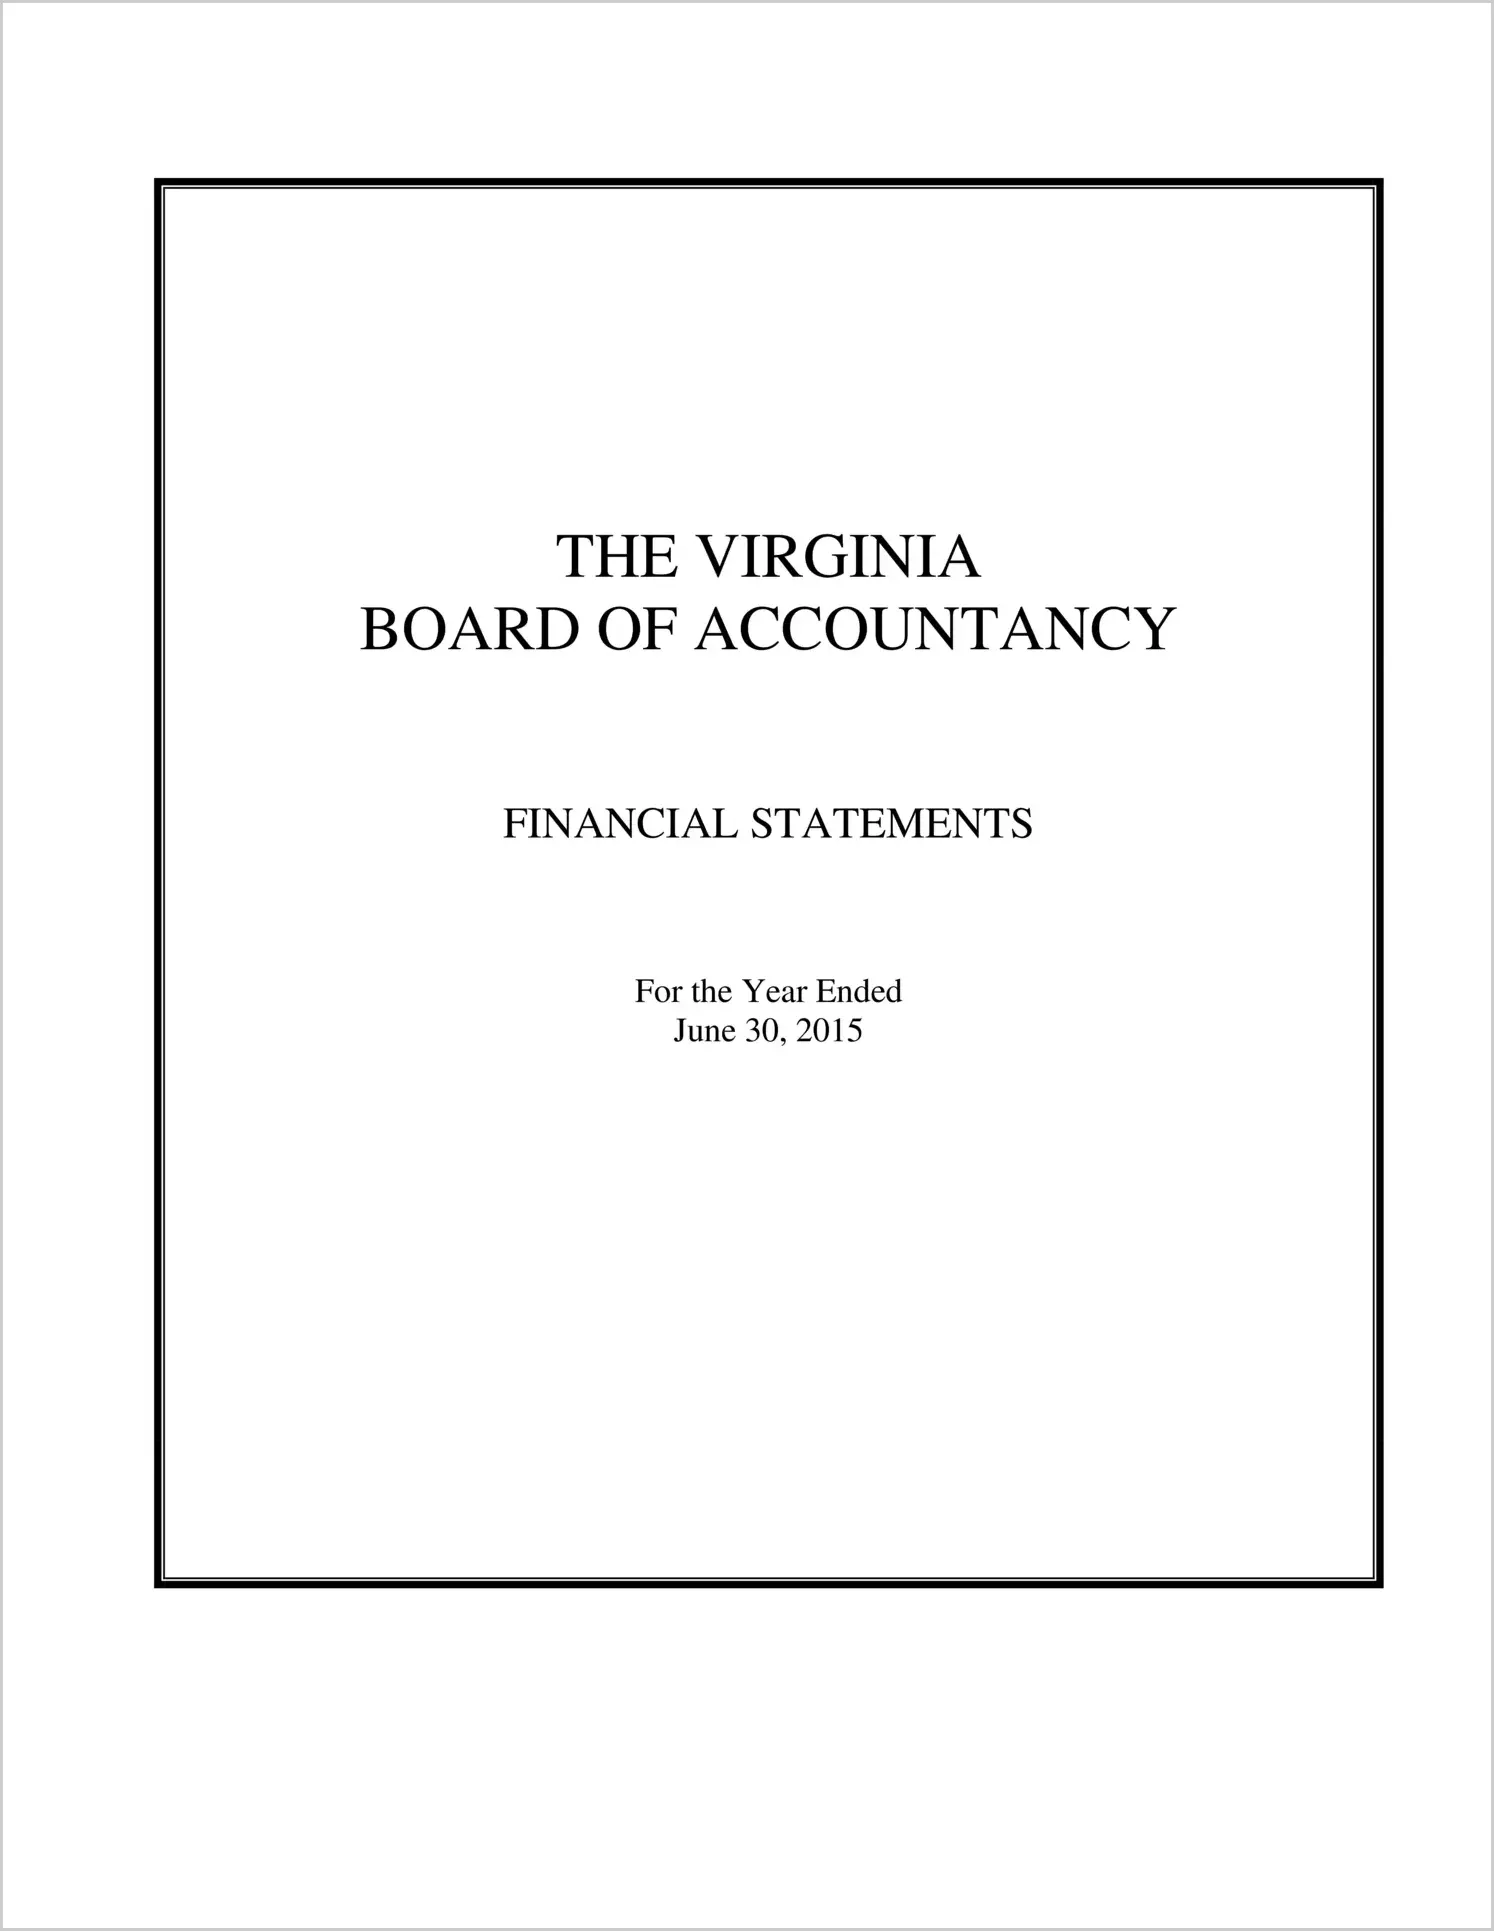 Virginia Board of Accountancy Financial Statements for the year ended June 30, 2015